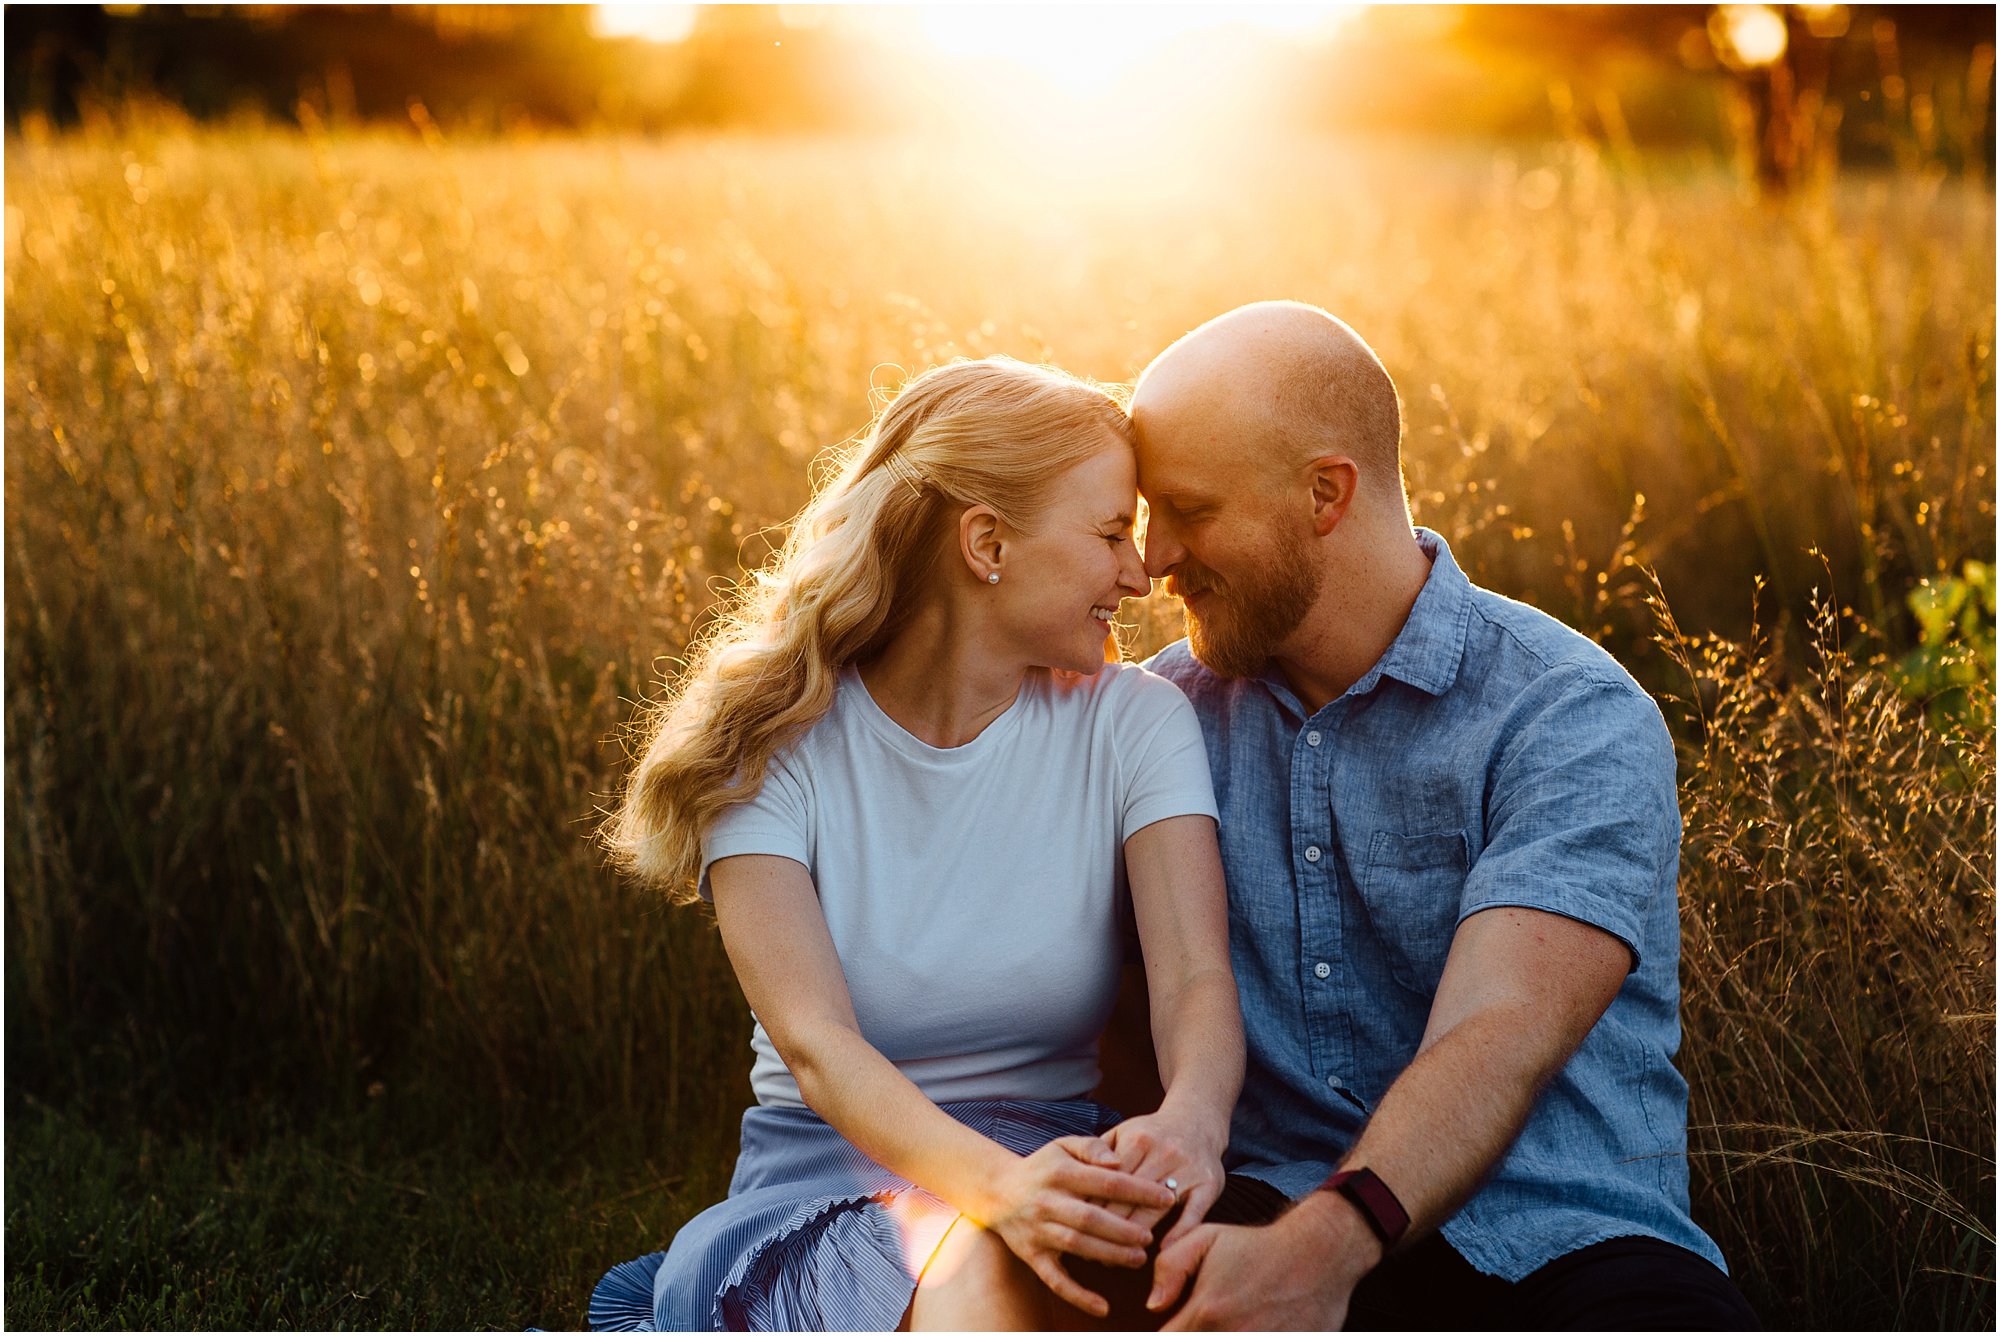 Couple touching noses and holding hands in a golden field during sunset